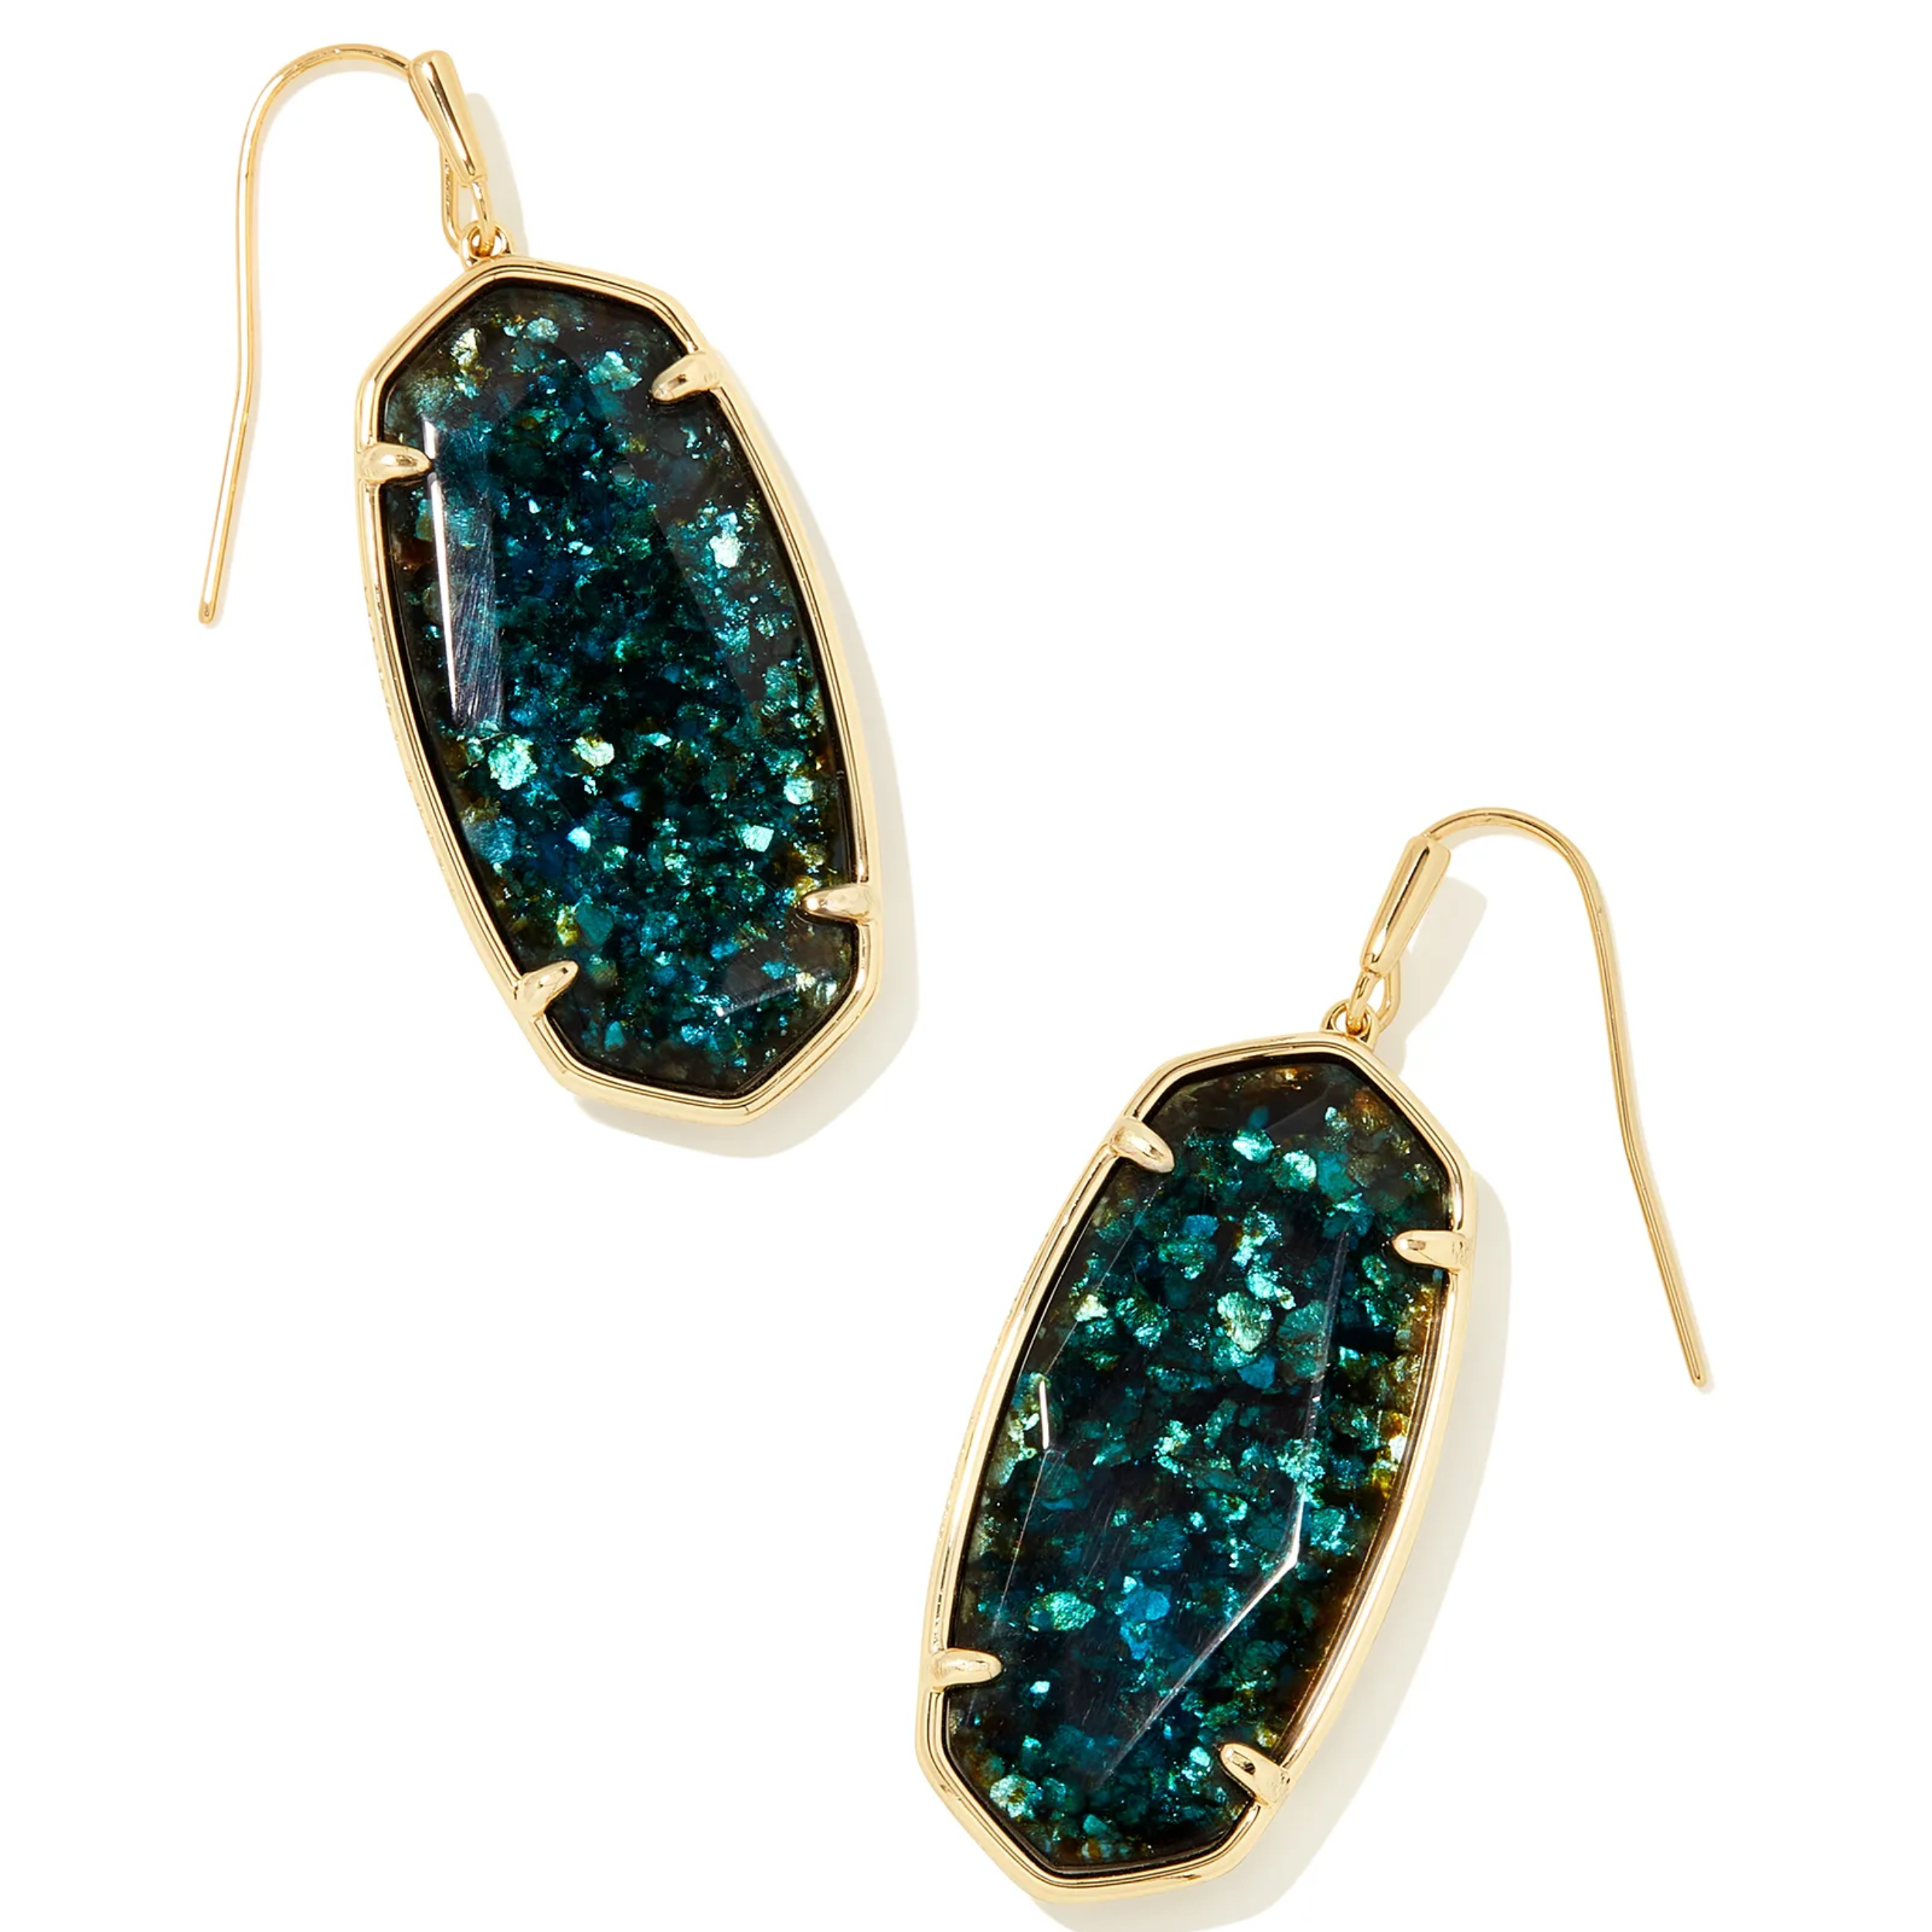 These Faceted Ella Gold Drop Earrings in Dark Teal Mica by Kendra Scott are pictured on a white background.